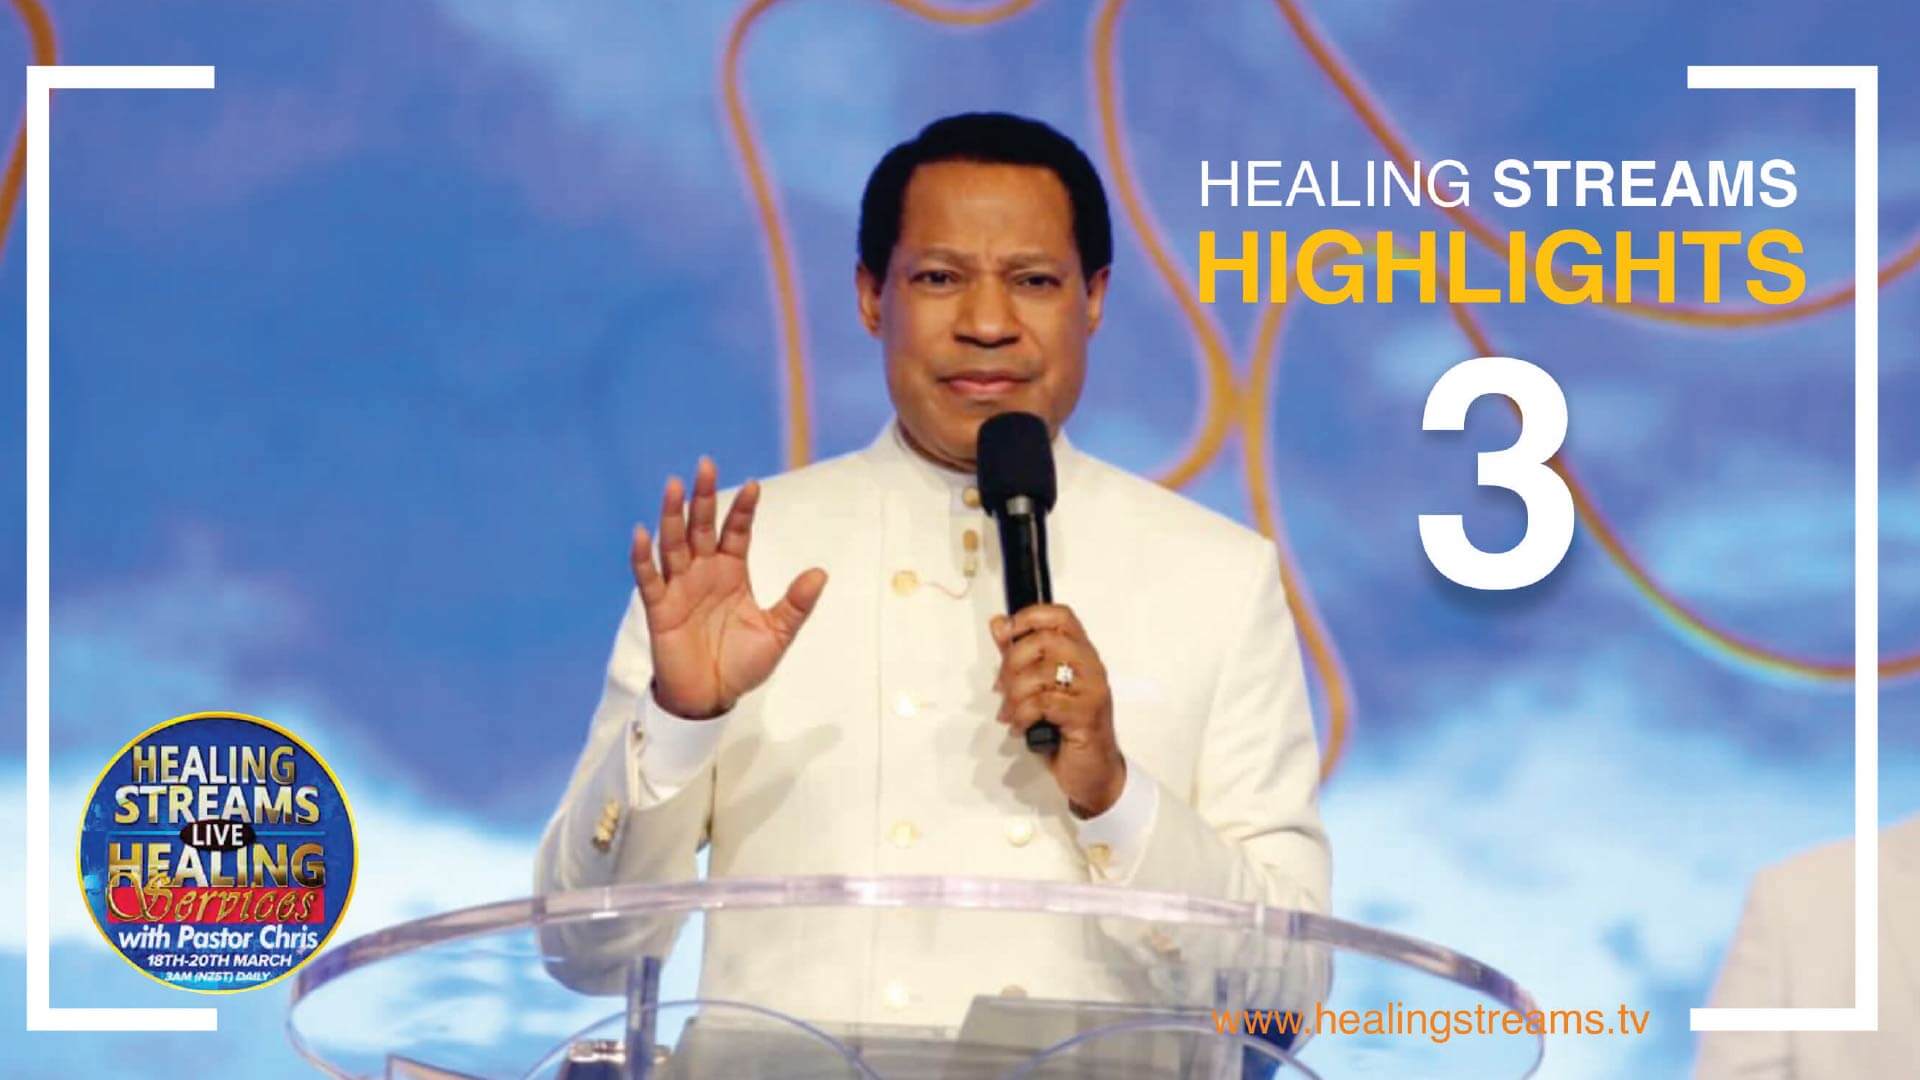 HEALING STREAMS LIVE HEALING SERVICES HIGHLIGHTS 3